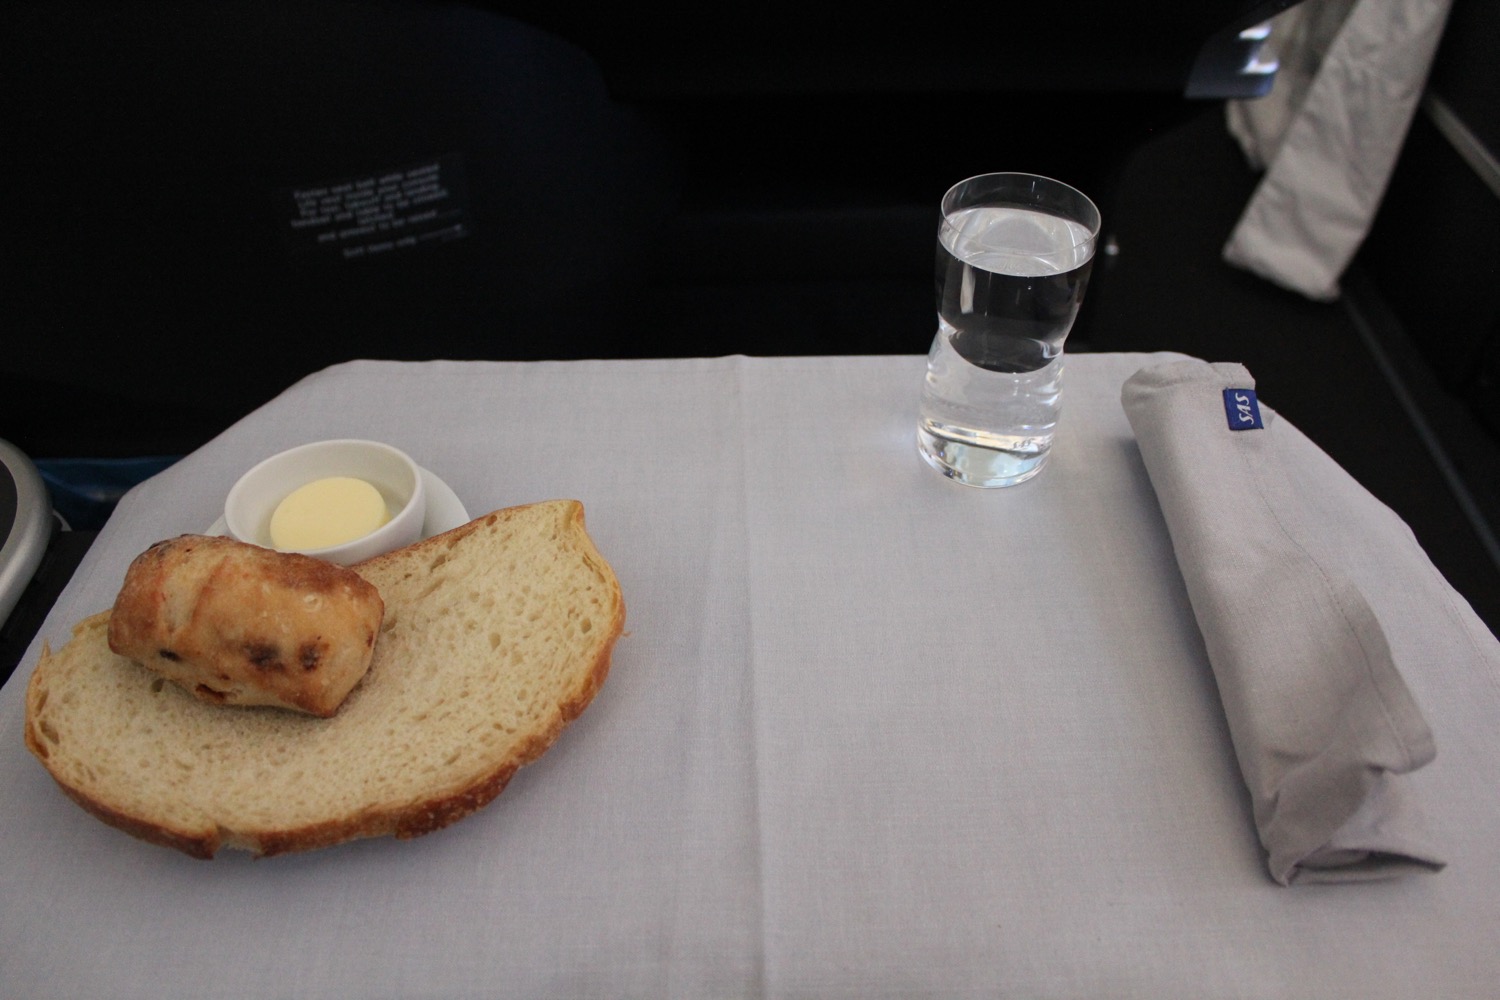 a piece of bread and a glass of water on a table